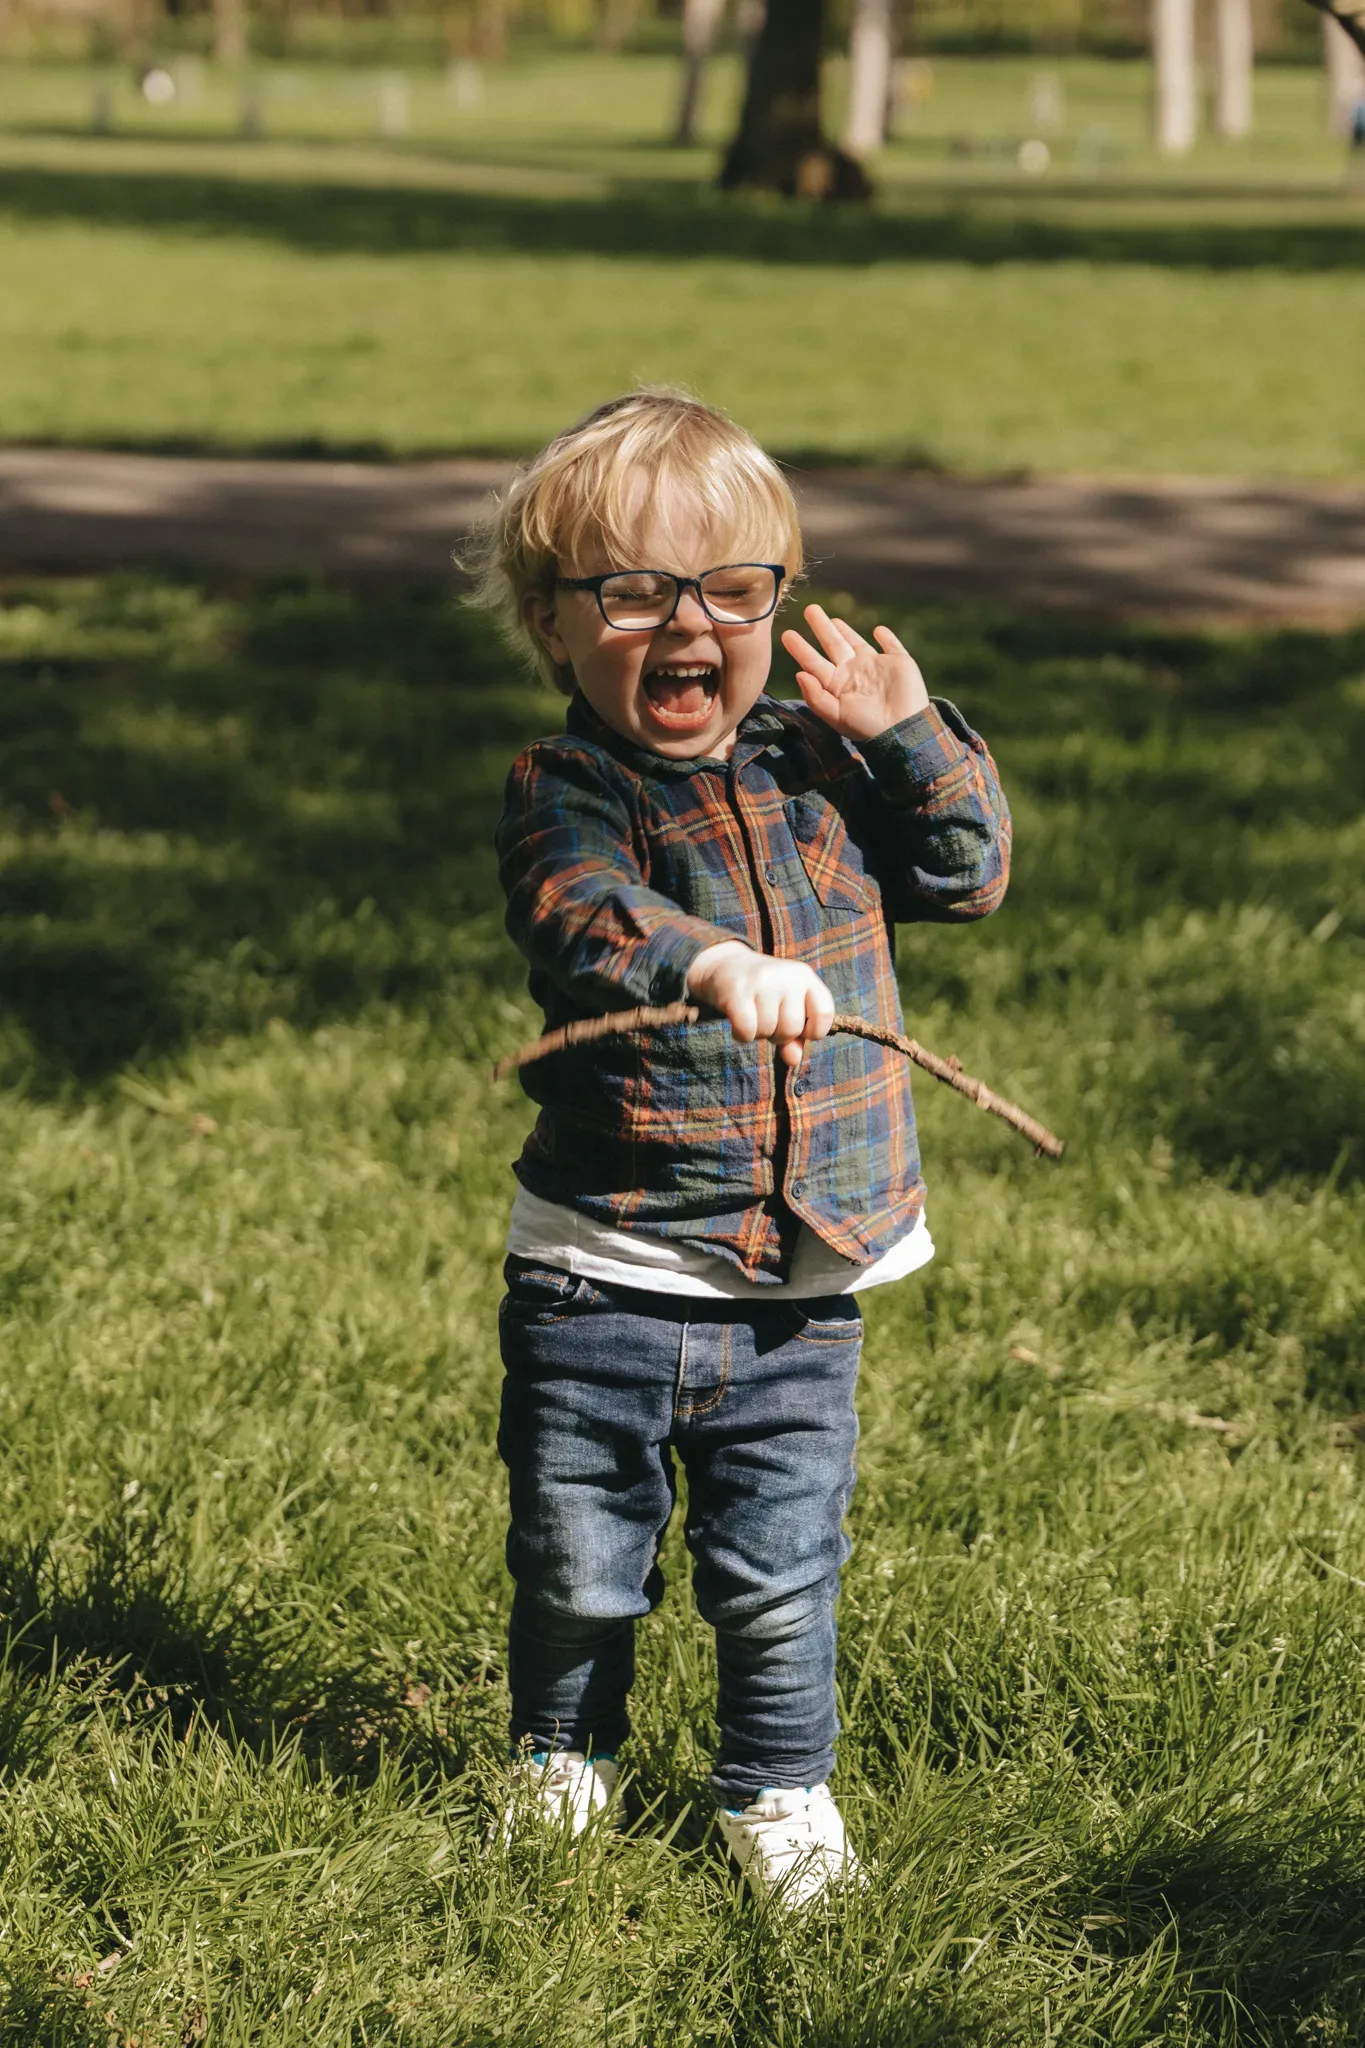 A joyful young boy with blond hair and glasses laughs while holding a stick in a park. he wears a plaid shirt, jeans, and sneakers. the background shows lush green grass and scattered trees under a clear sky.